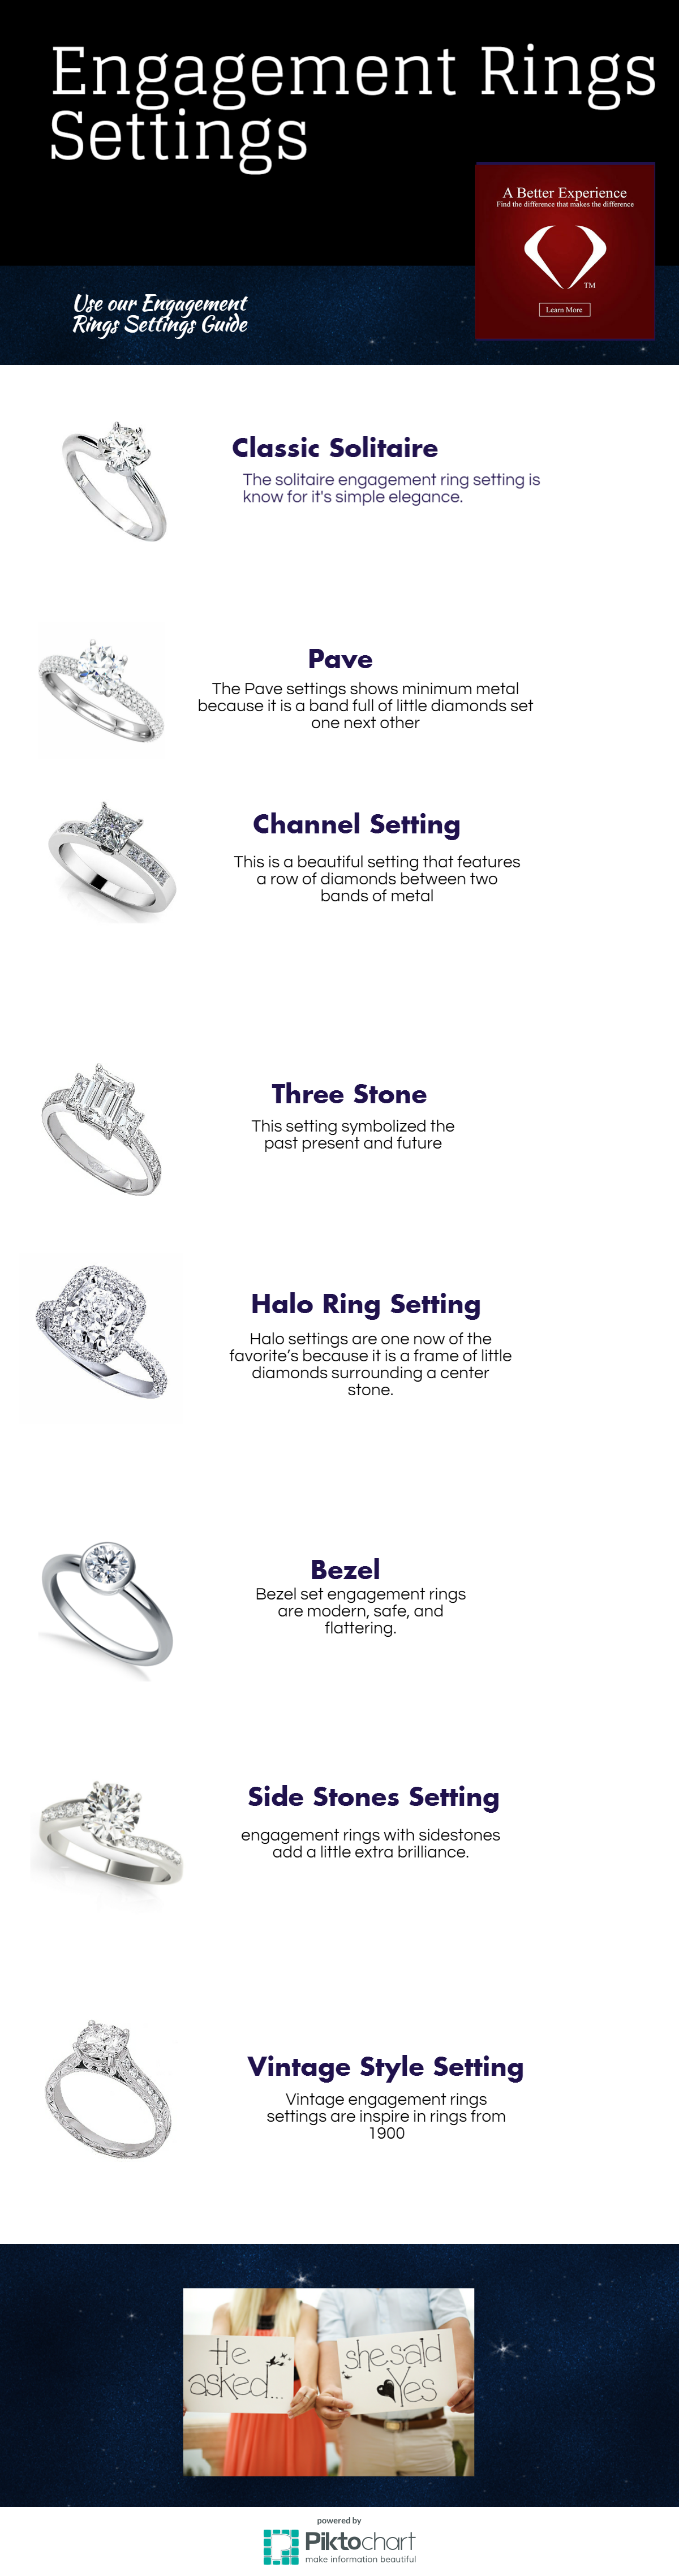 Five Beautiful Engagement Rings Under $5,000 to Say 'I Do | Diamond Registry